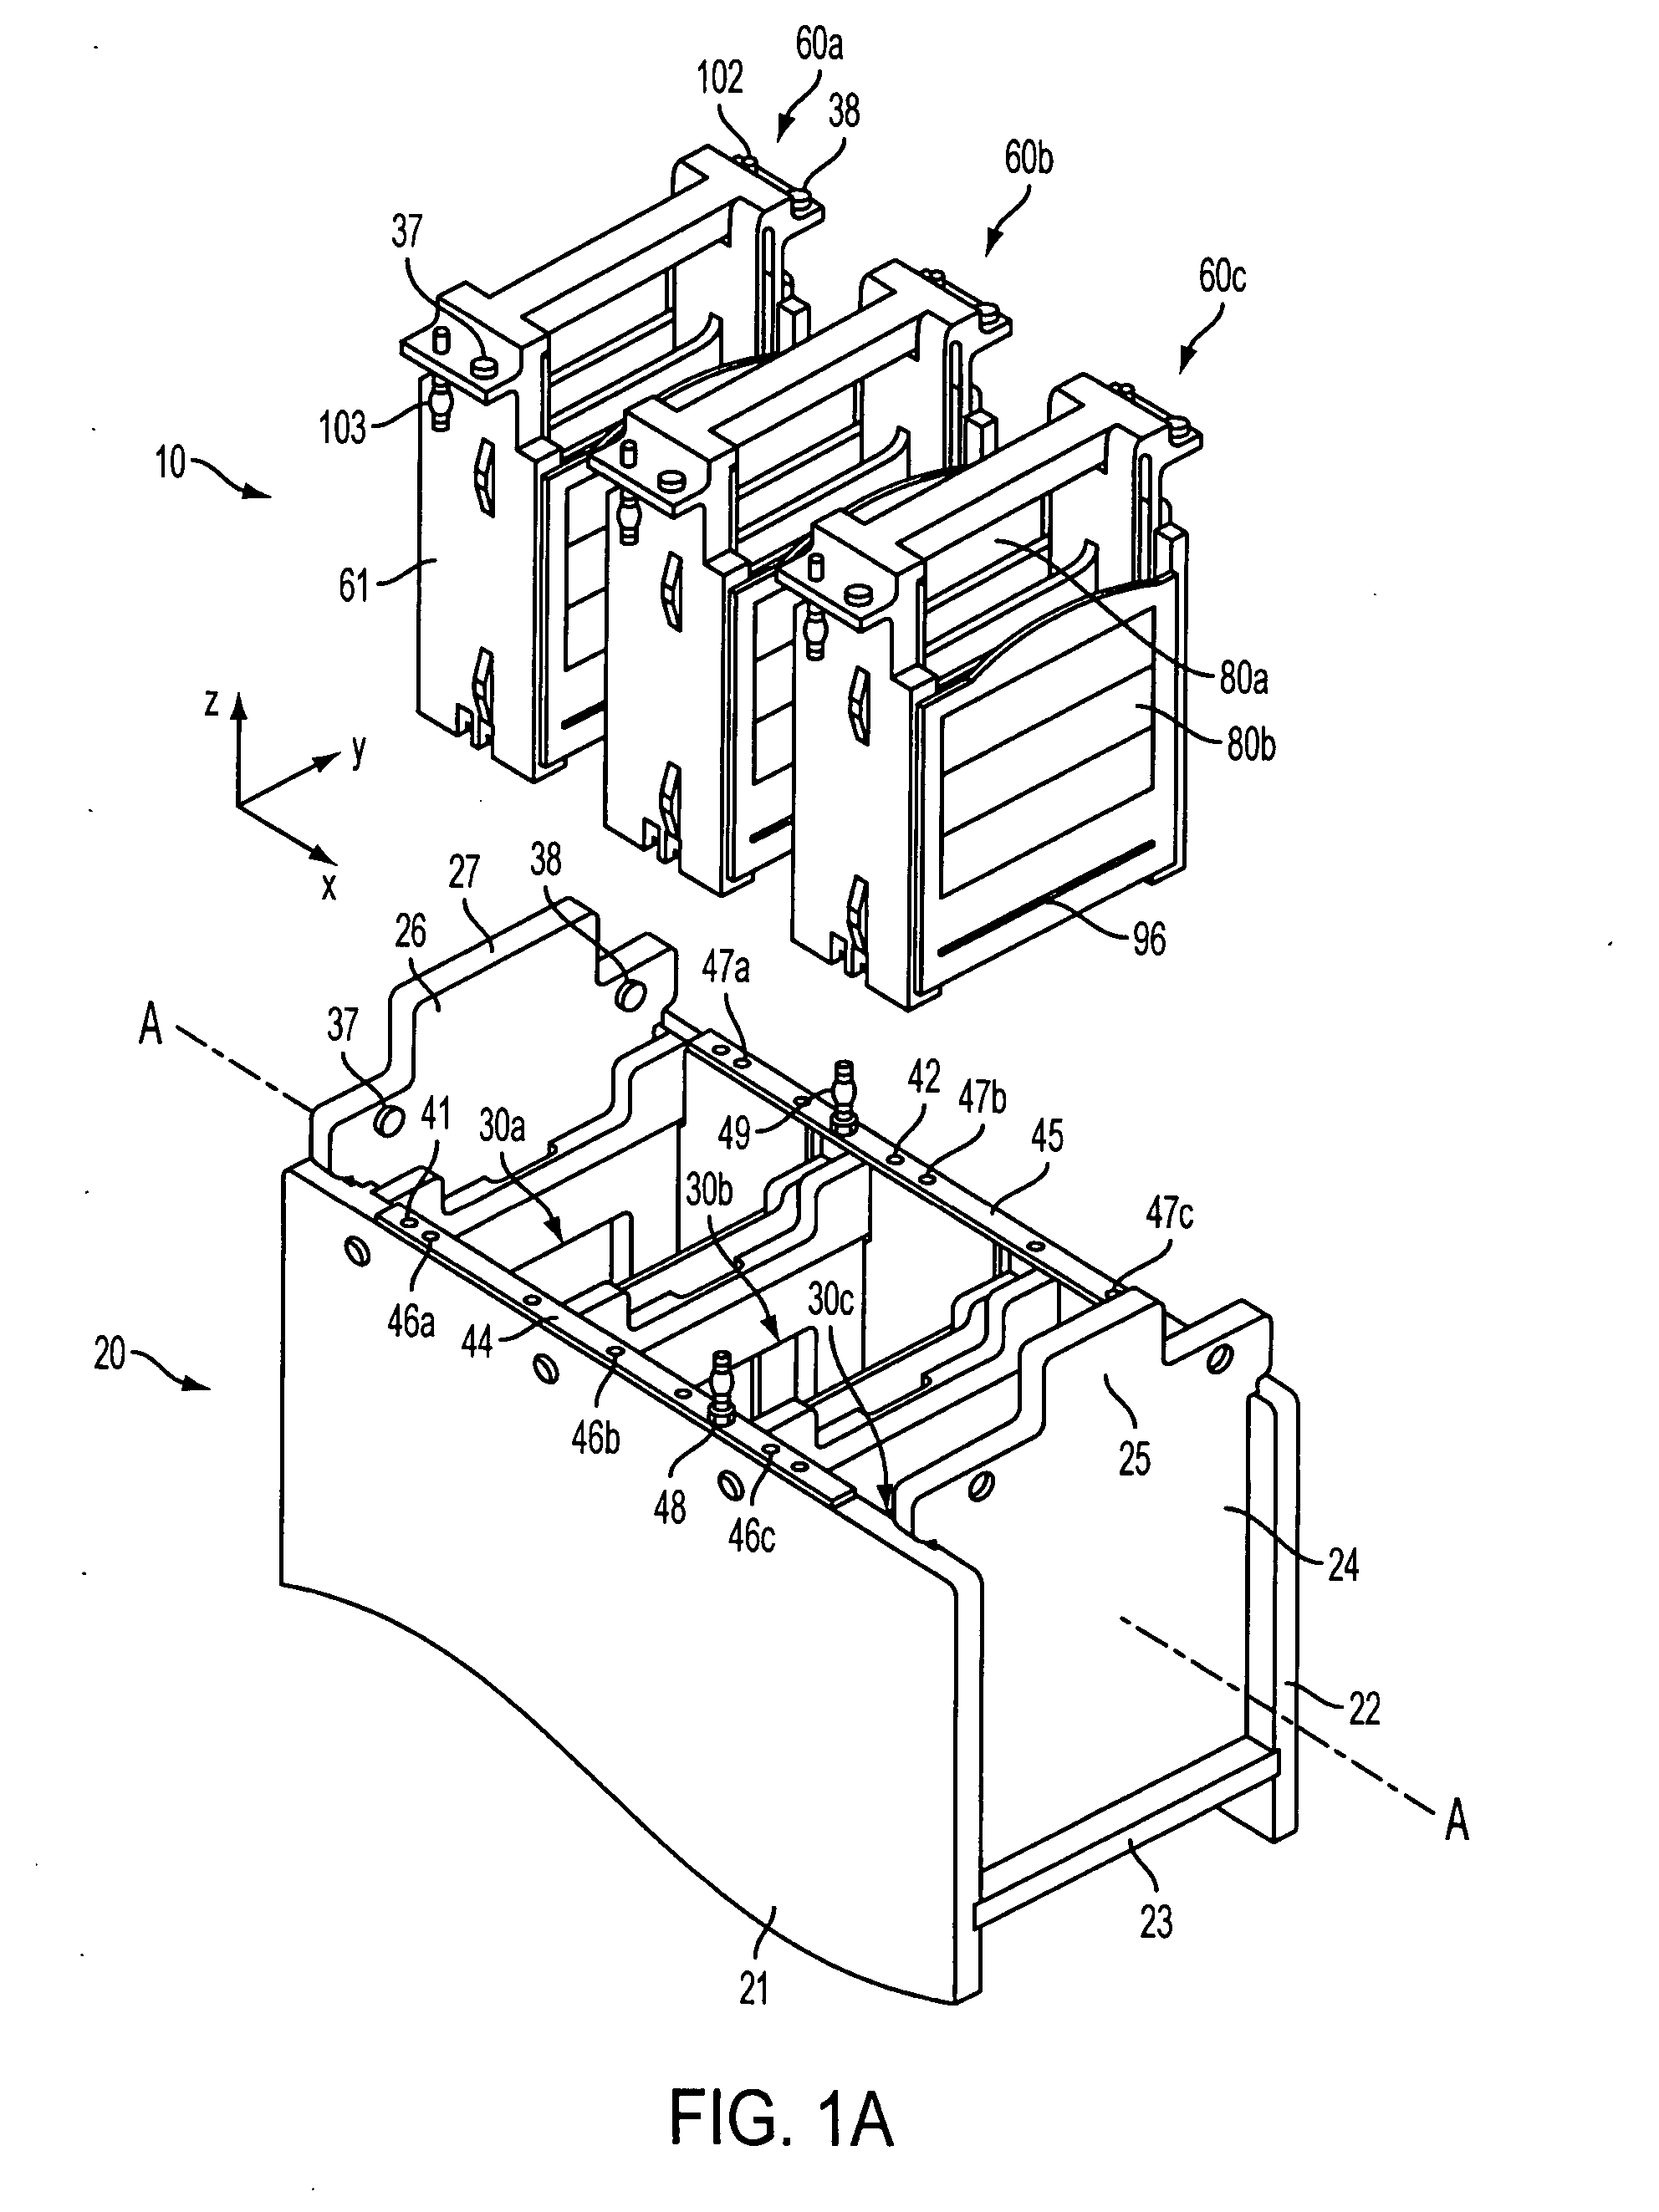 Apparatus for concurrent electrophoresis in a plurality of gels